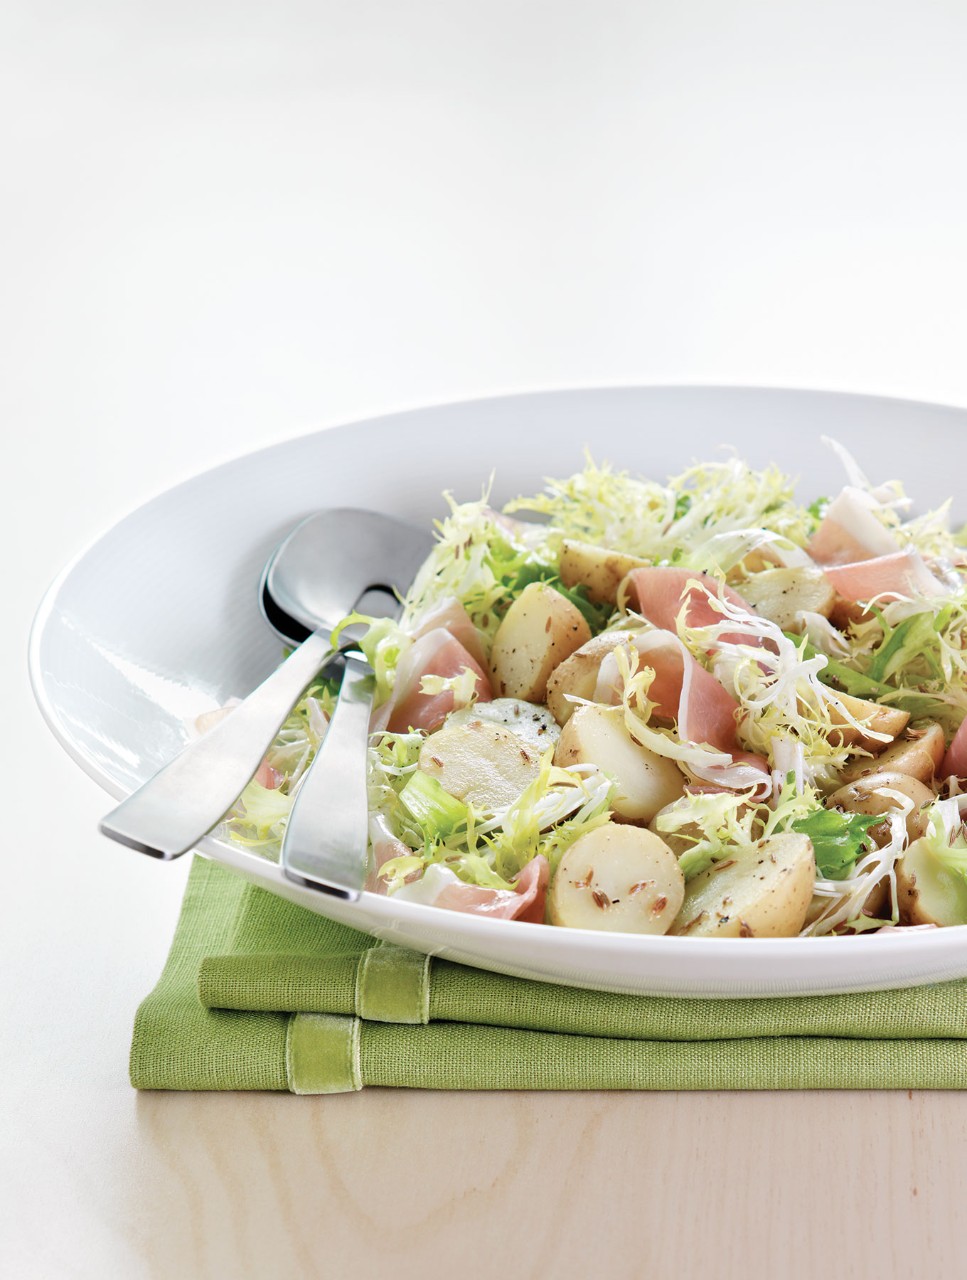 Warm Frisée Salad with Potatoes and Ham